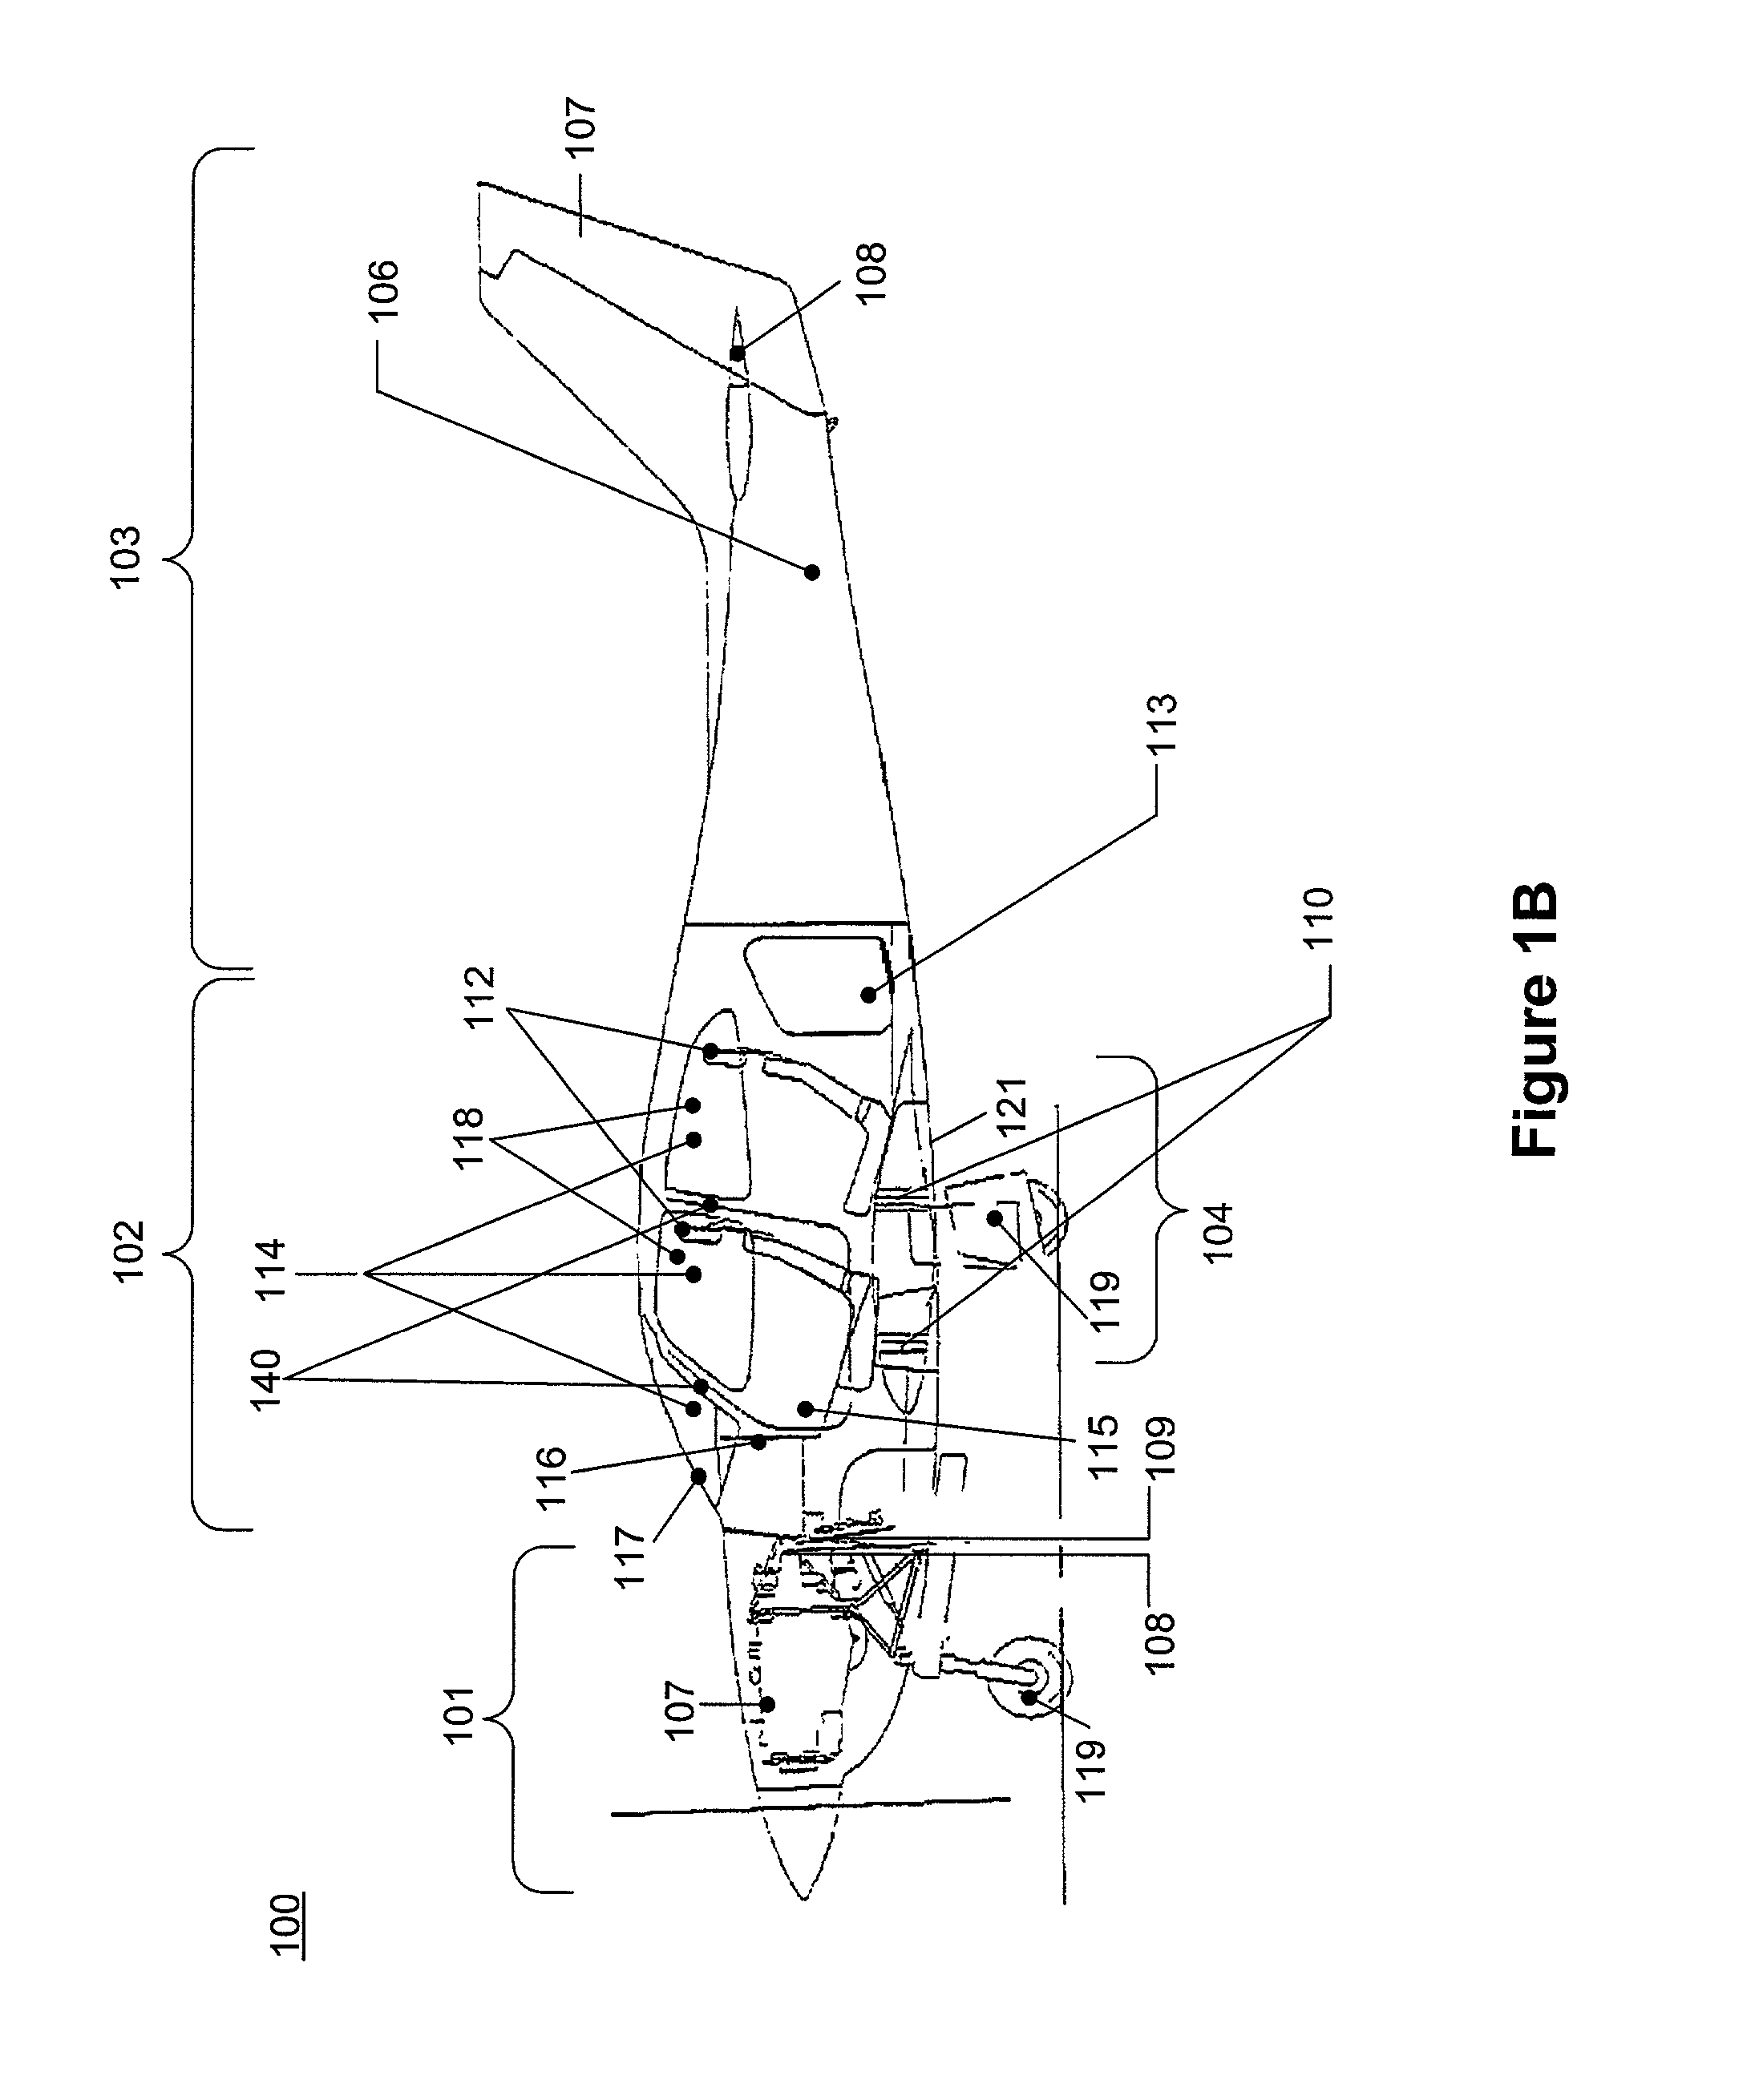 One-piece closed-shape structure and method of forming same